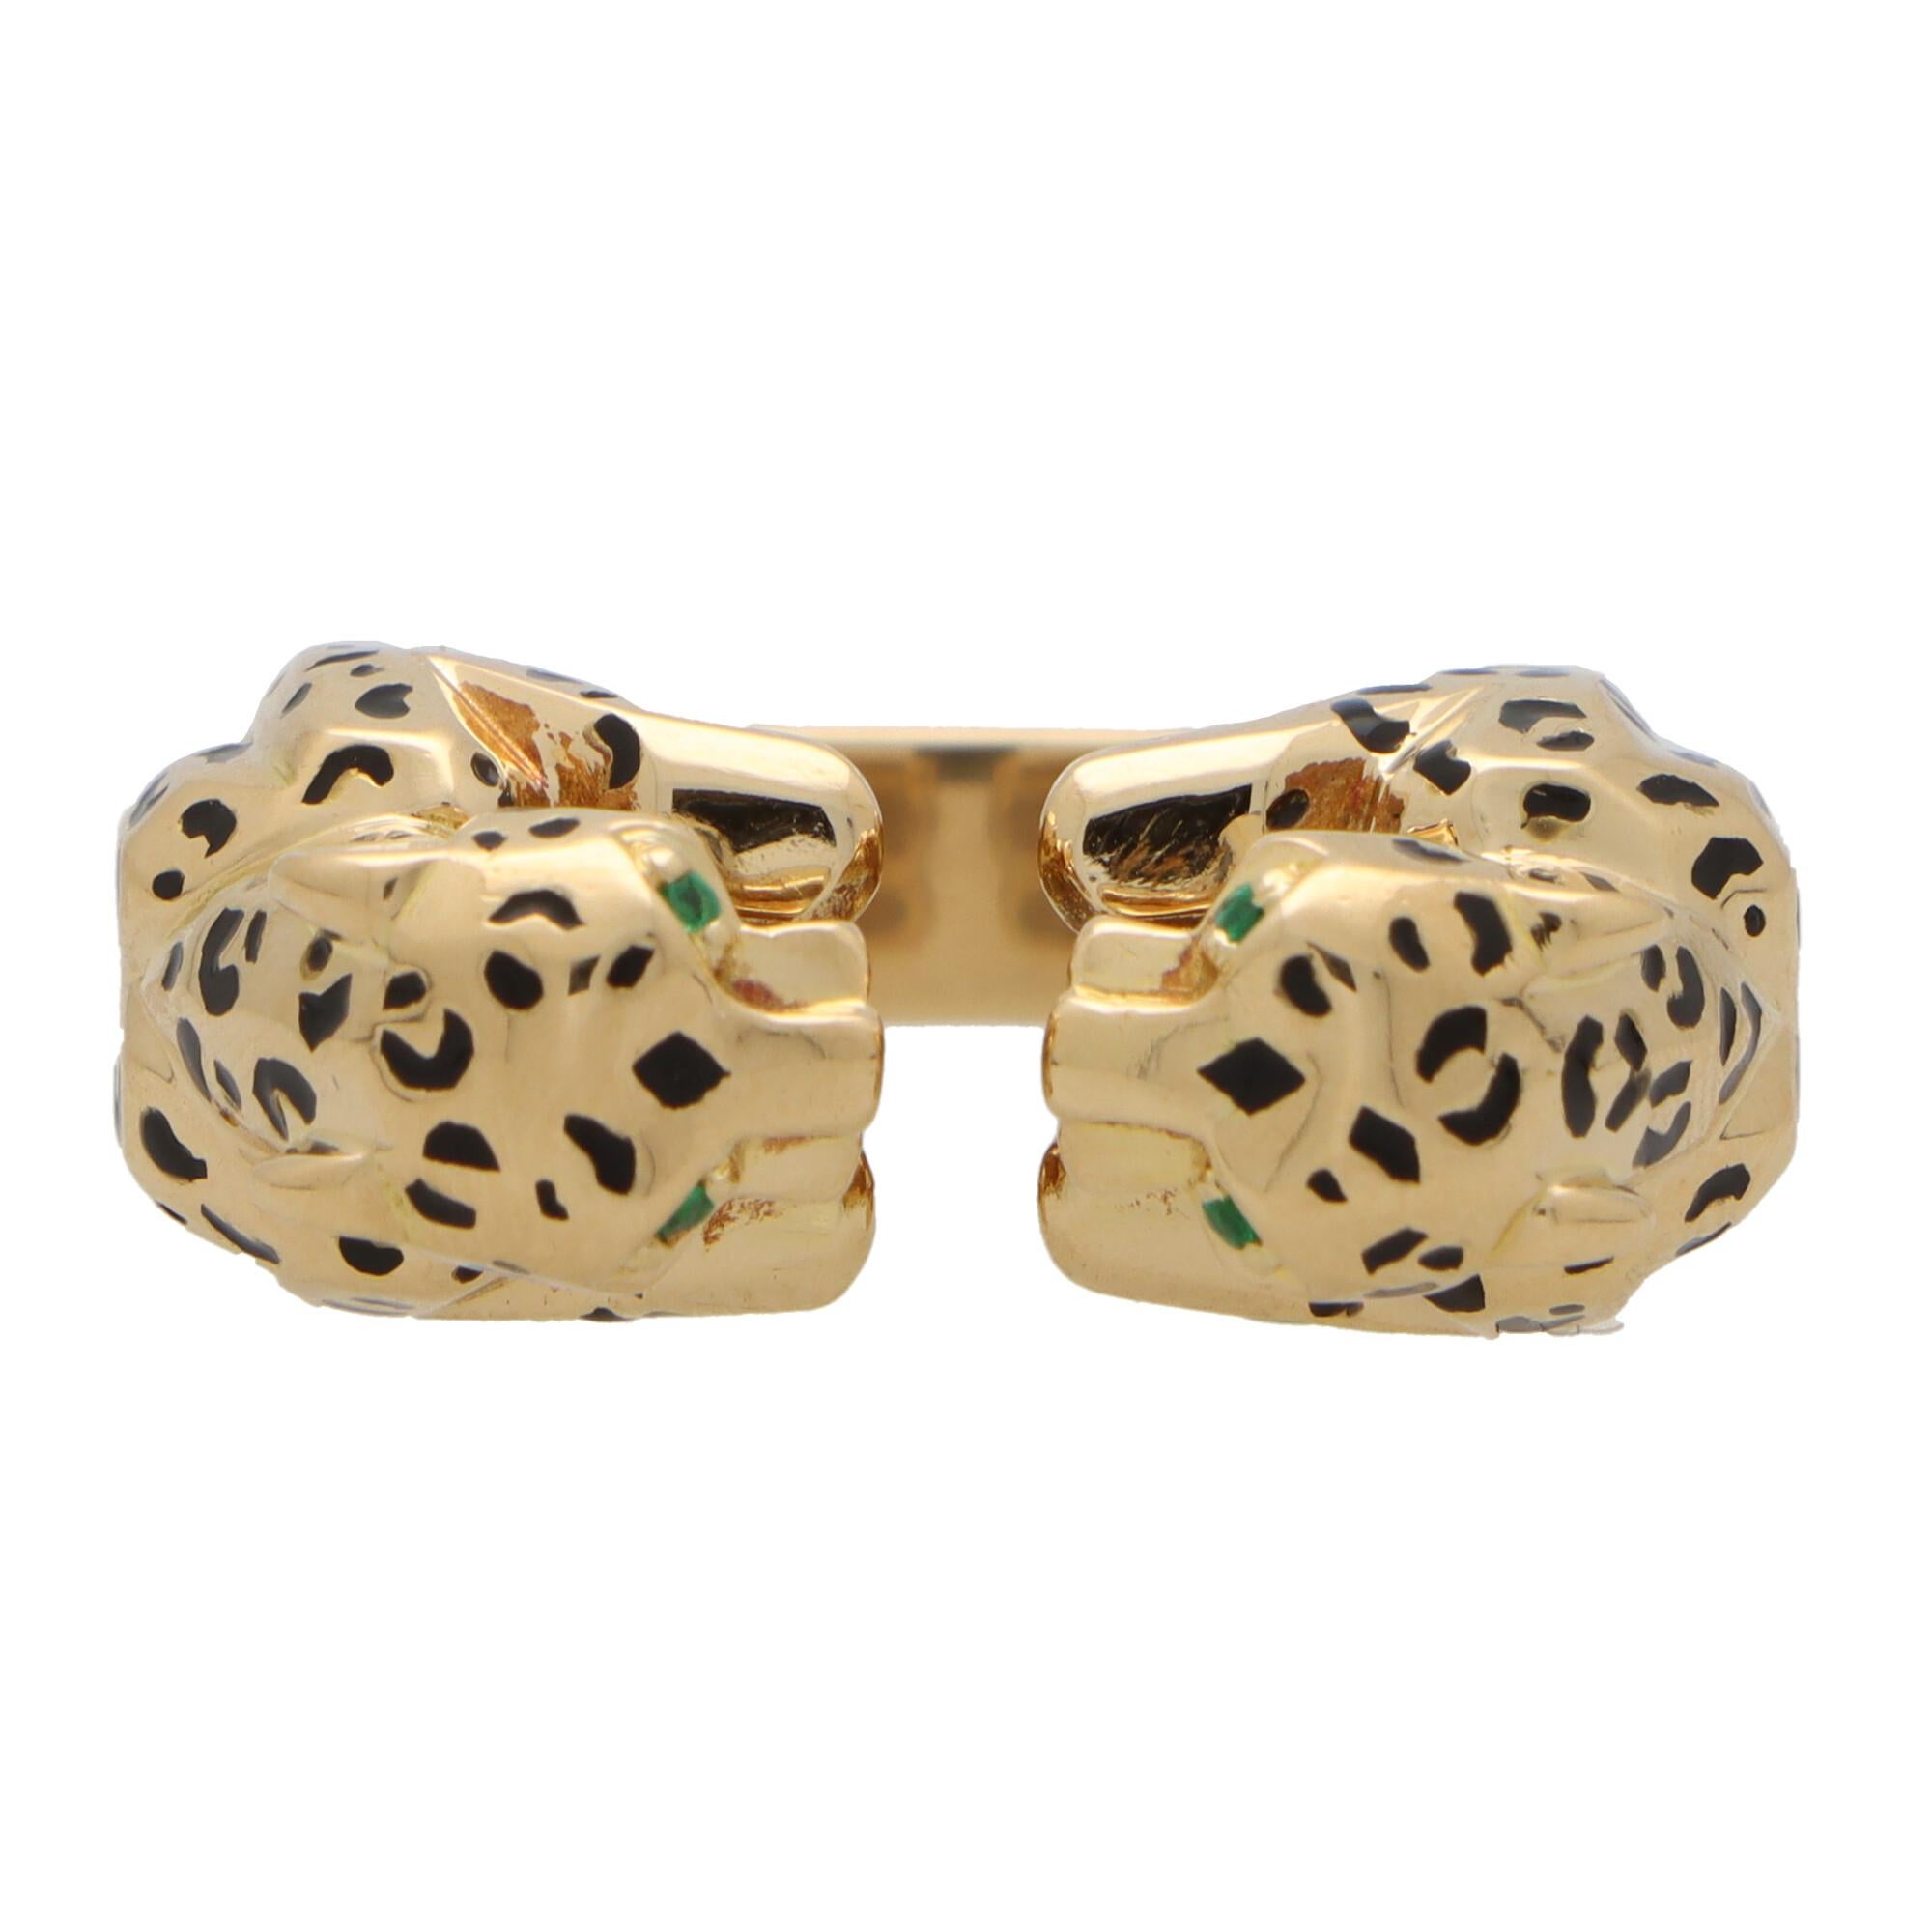 Retro Vintage Cartier Emerald and Enamel Double Panther Head Ring in 18k Yellow Gold